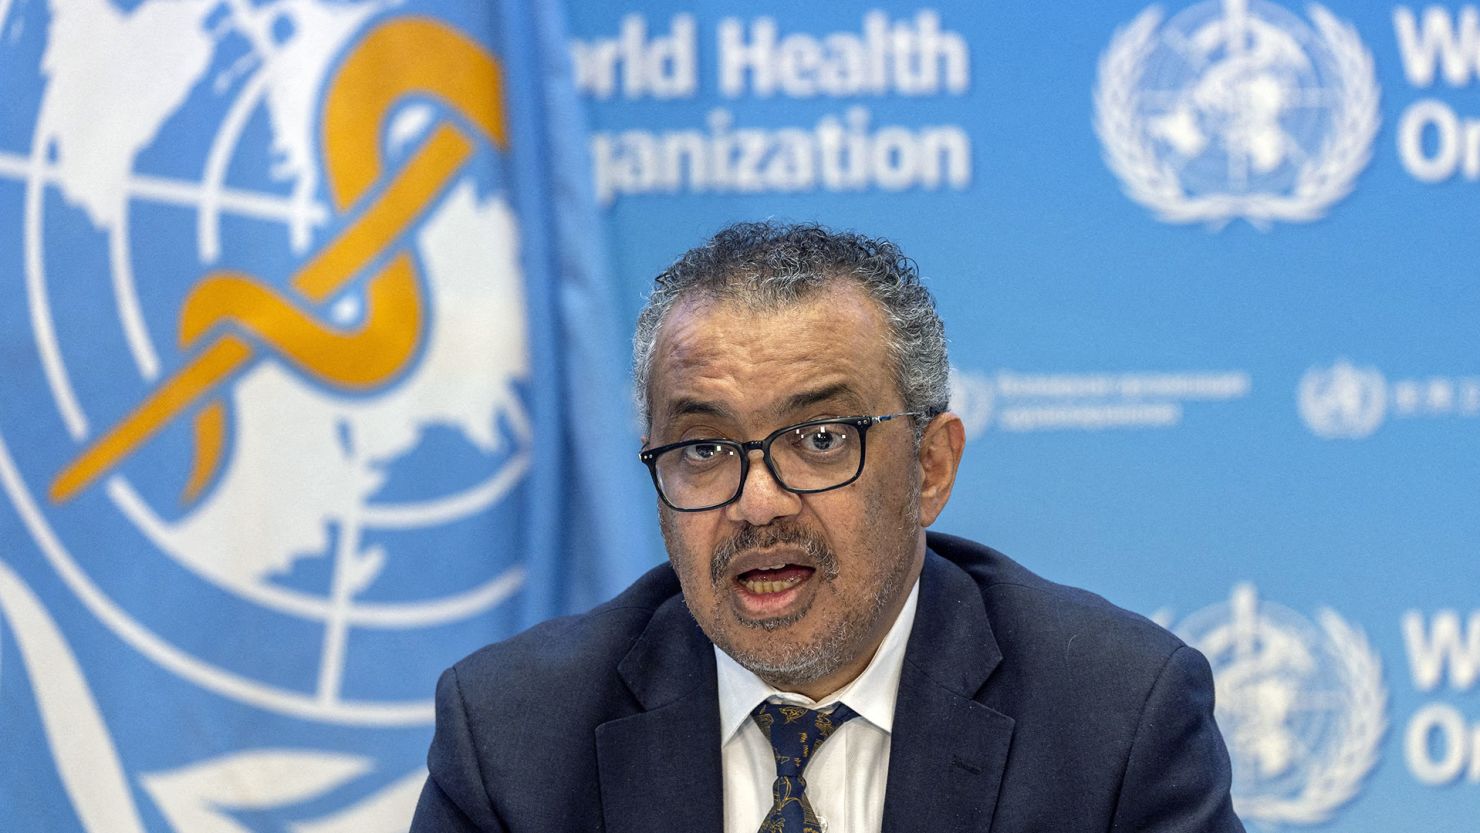 The World Health Organization declares an end to the Covid-19 global health emergency.